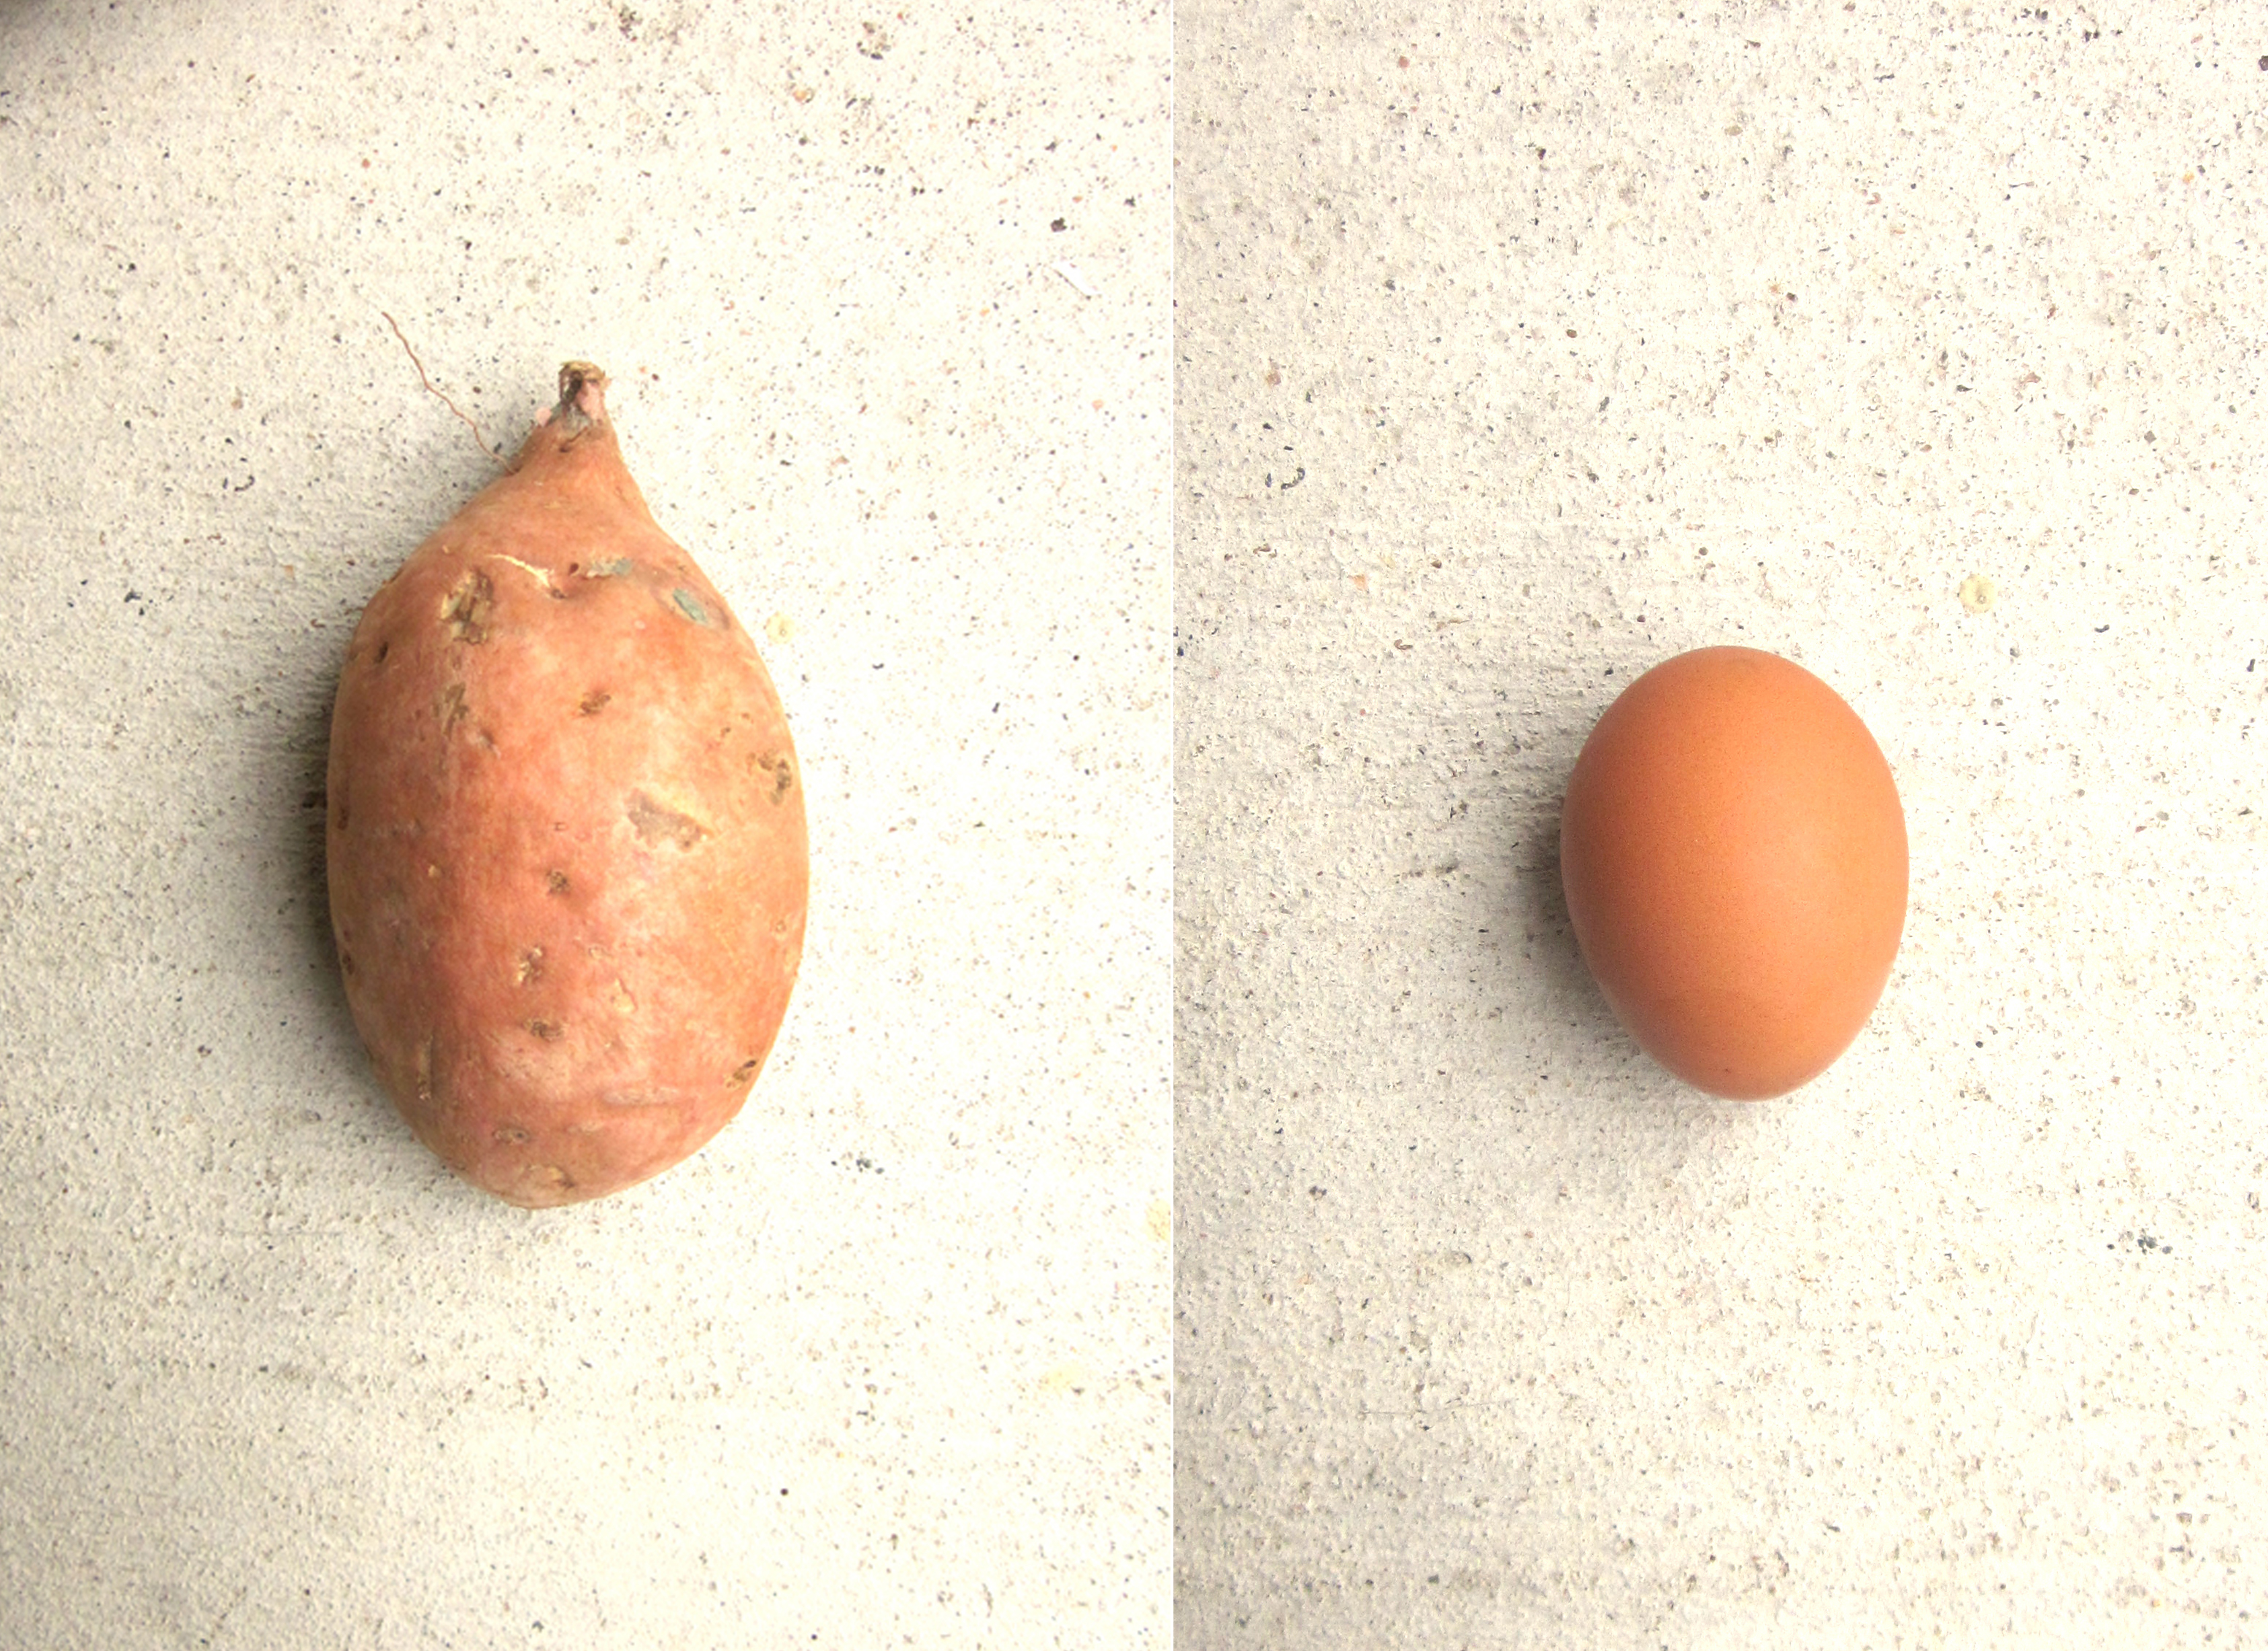 The Sweet Potato and the Egg.